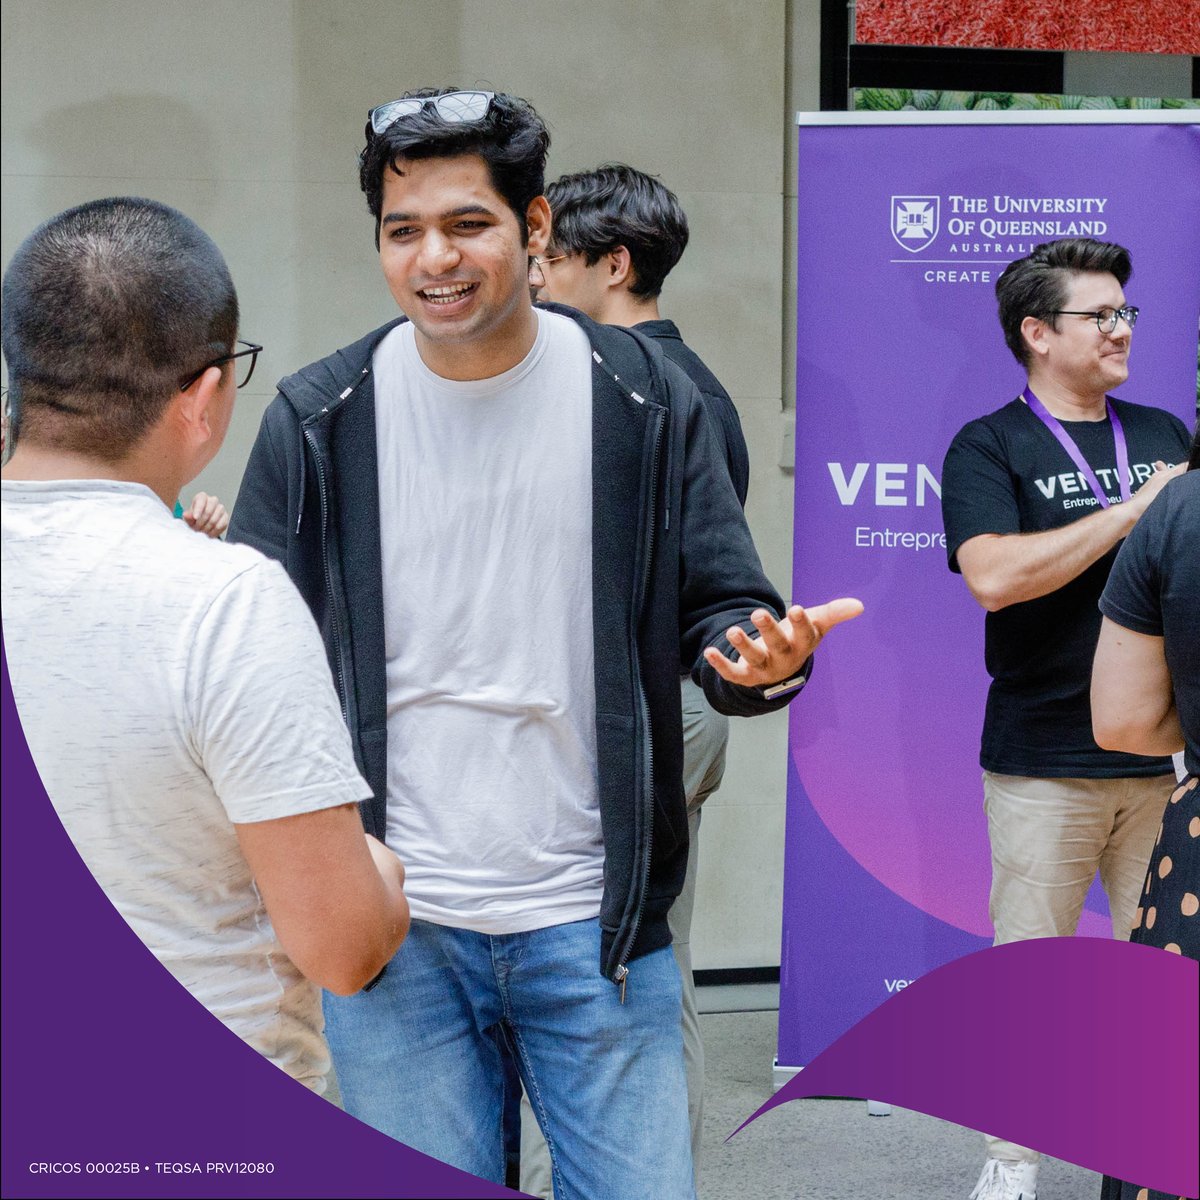 Network with some of Brisbane's best local startups at Ventures Startup Mixer. 👍 The event includes a reverse pitch where our startups pitch their business to you! All UQ students are welcome to attend. 📅 Join us 4-6pm Tuesday 5 March 👉 ventures.uq.edu.au/startup-mixer